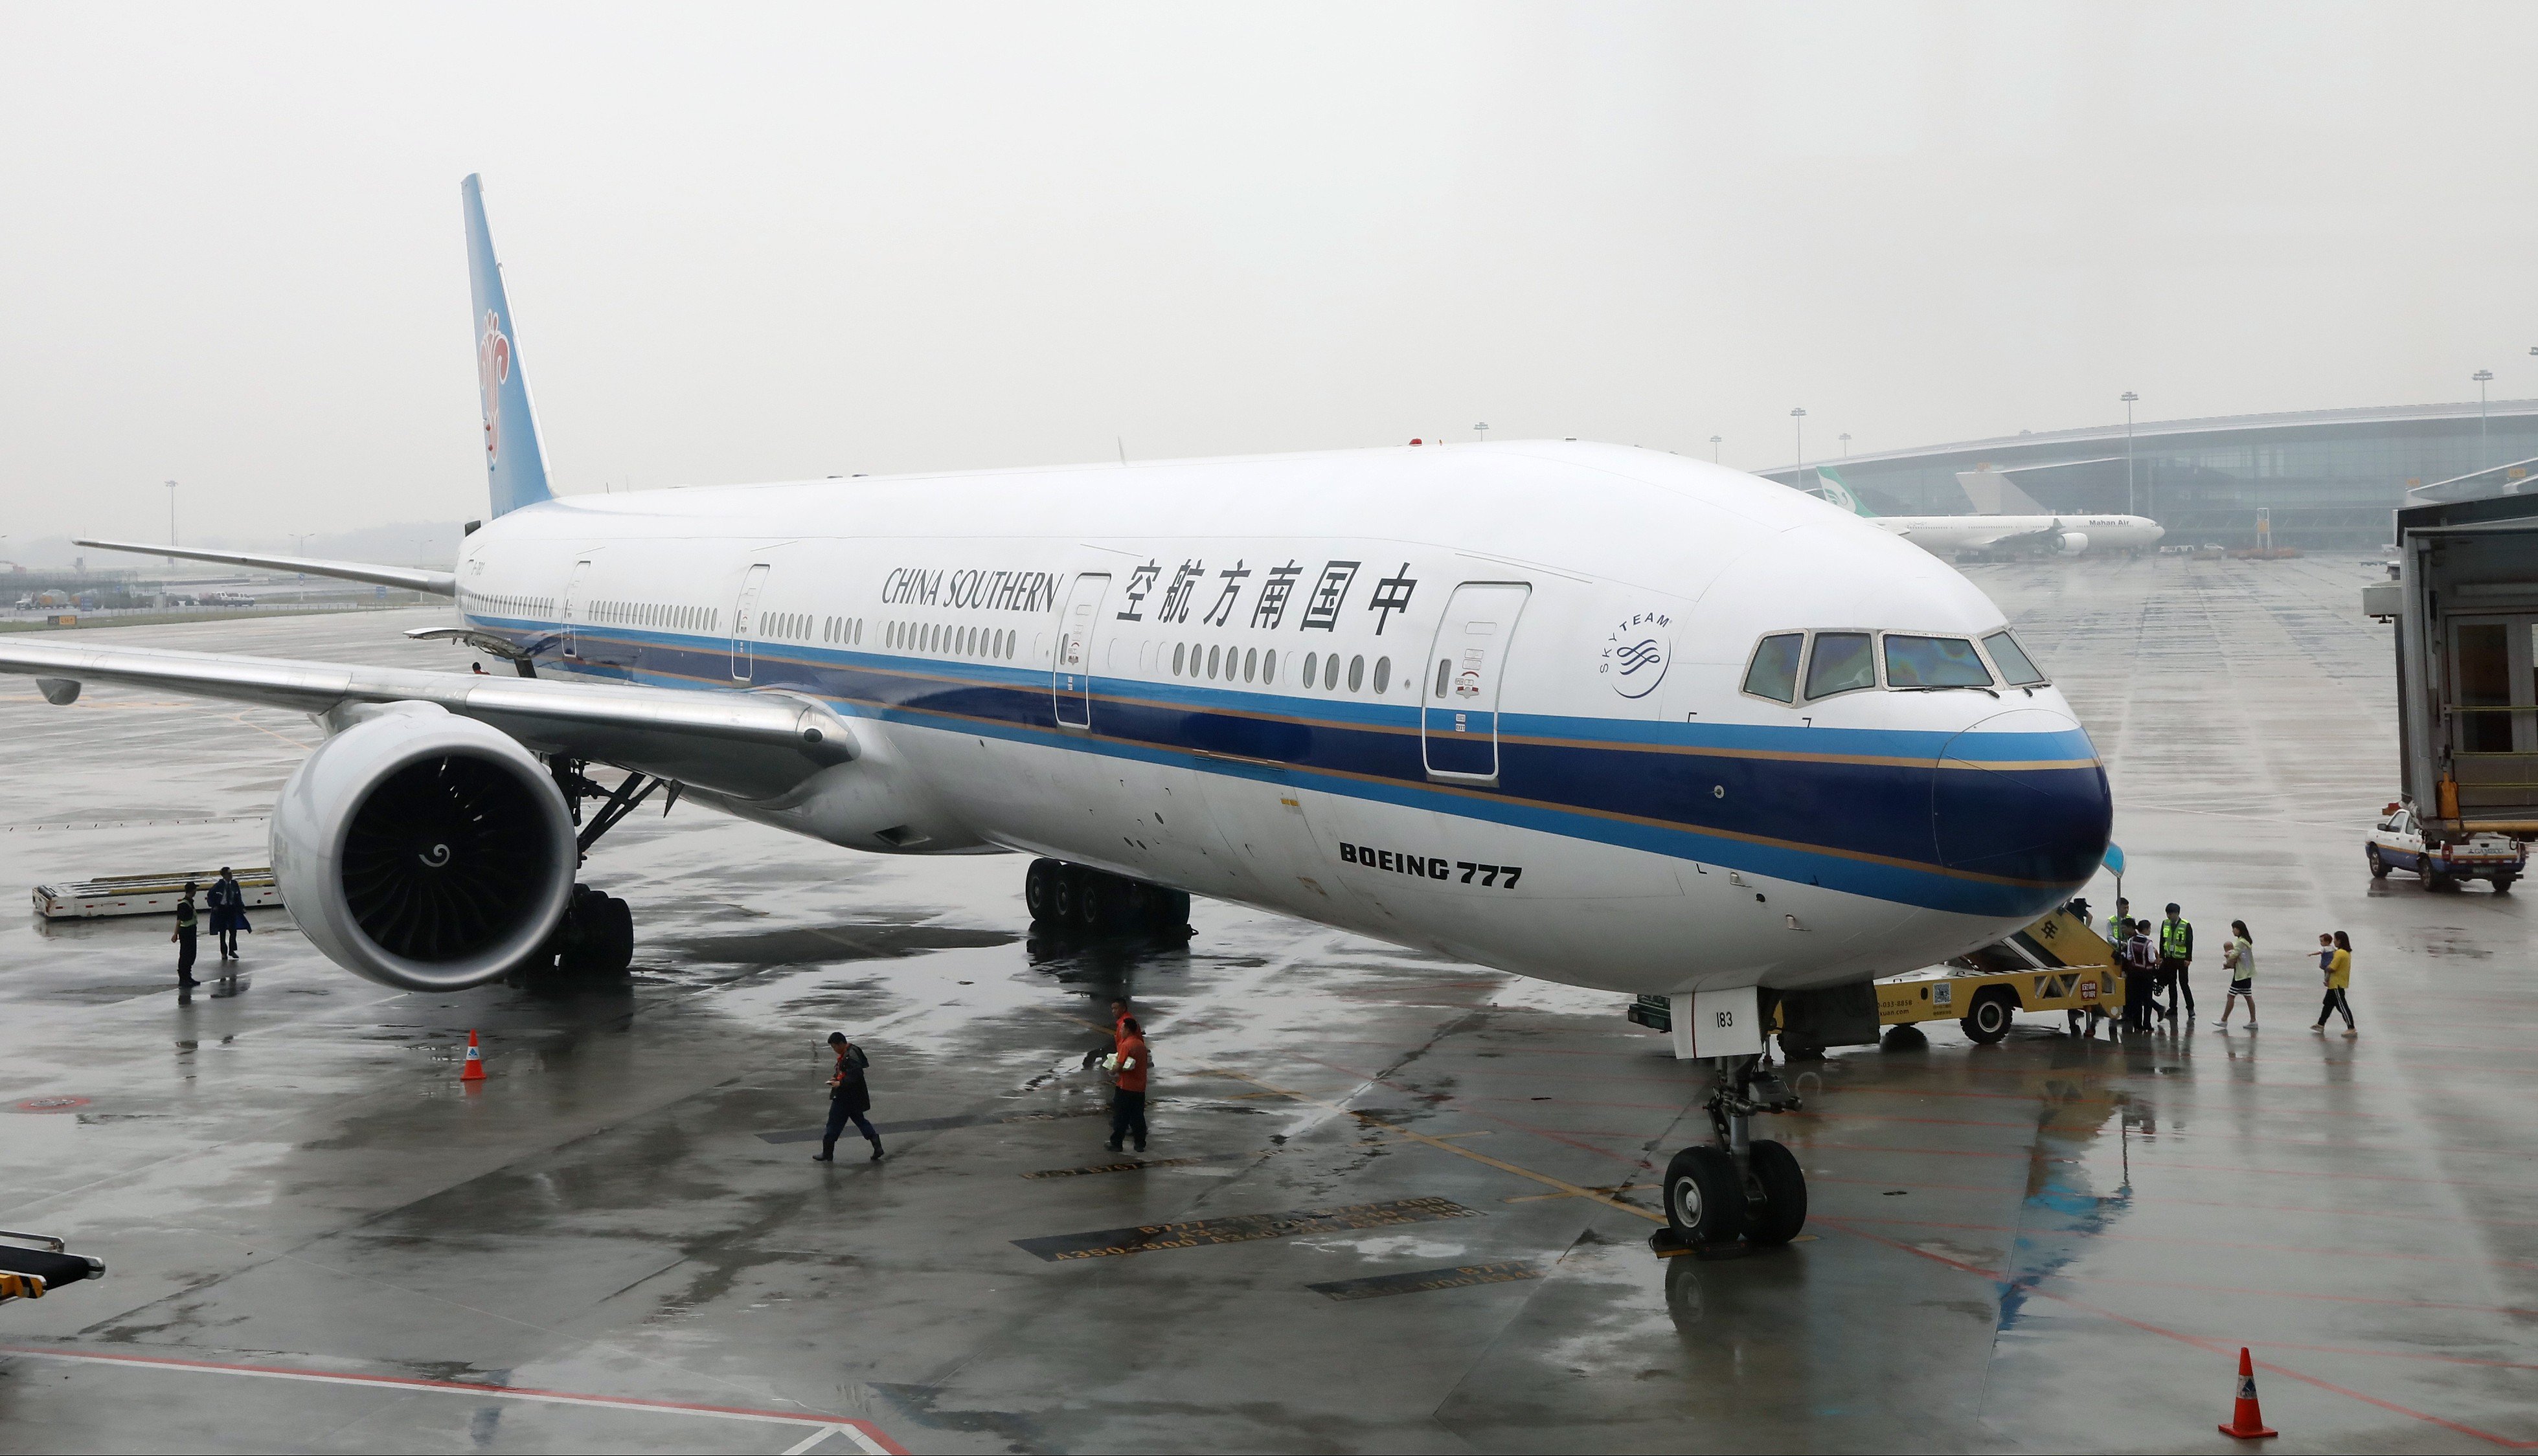 China Southern is aiming to become the world’s largest airline in three years. Photo: Edward Wong